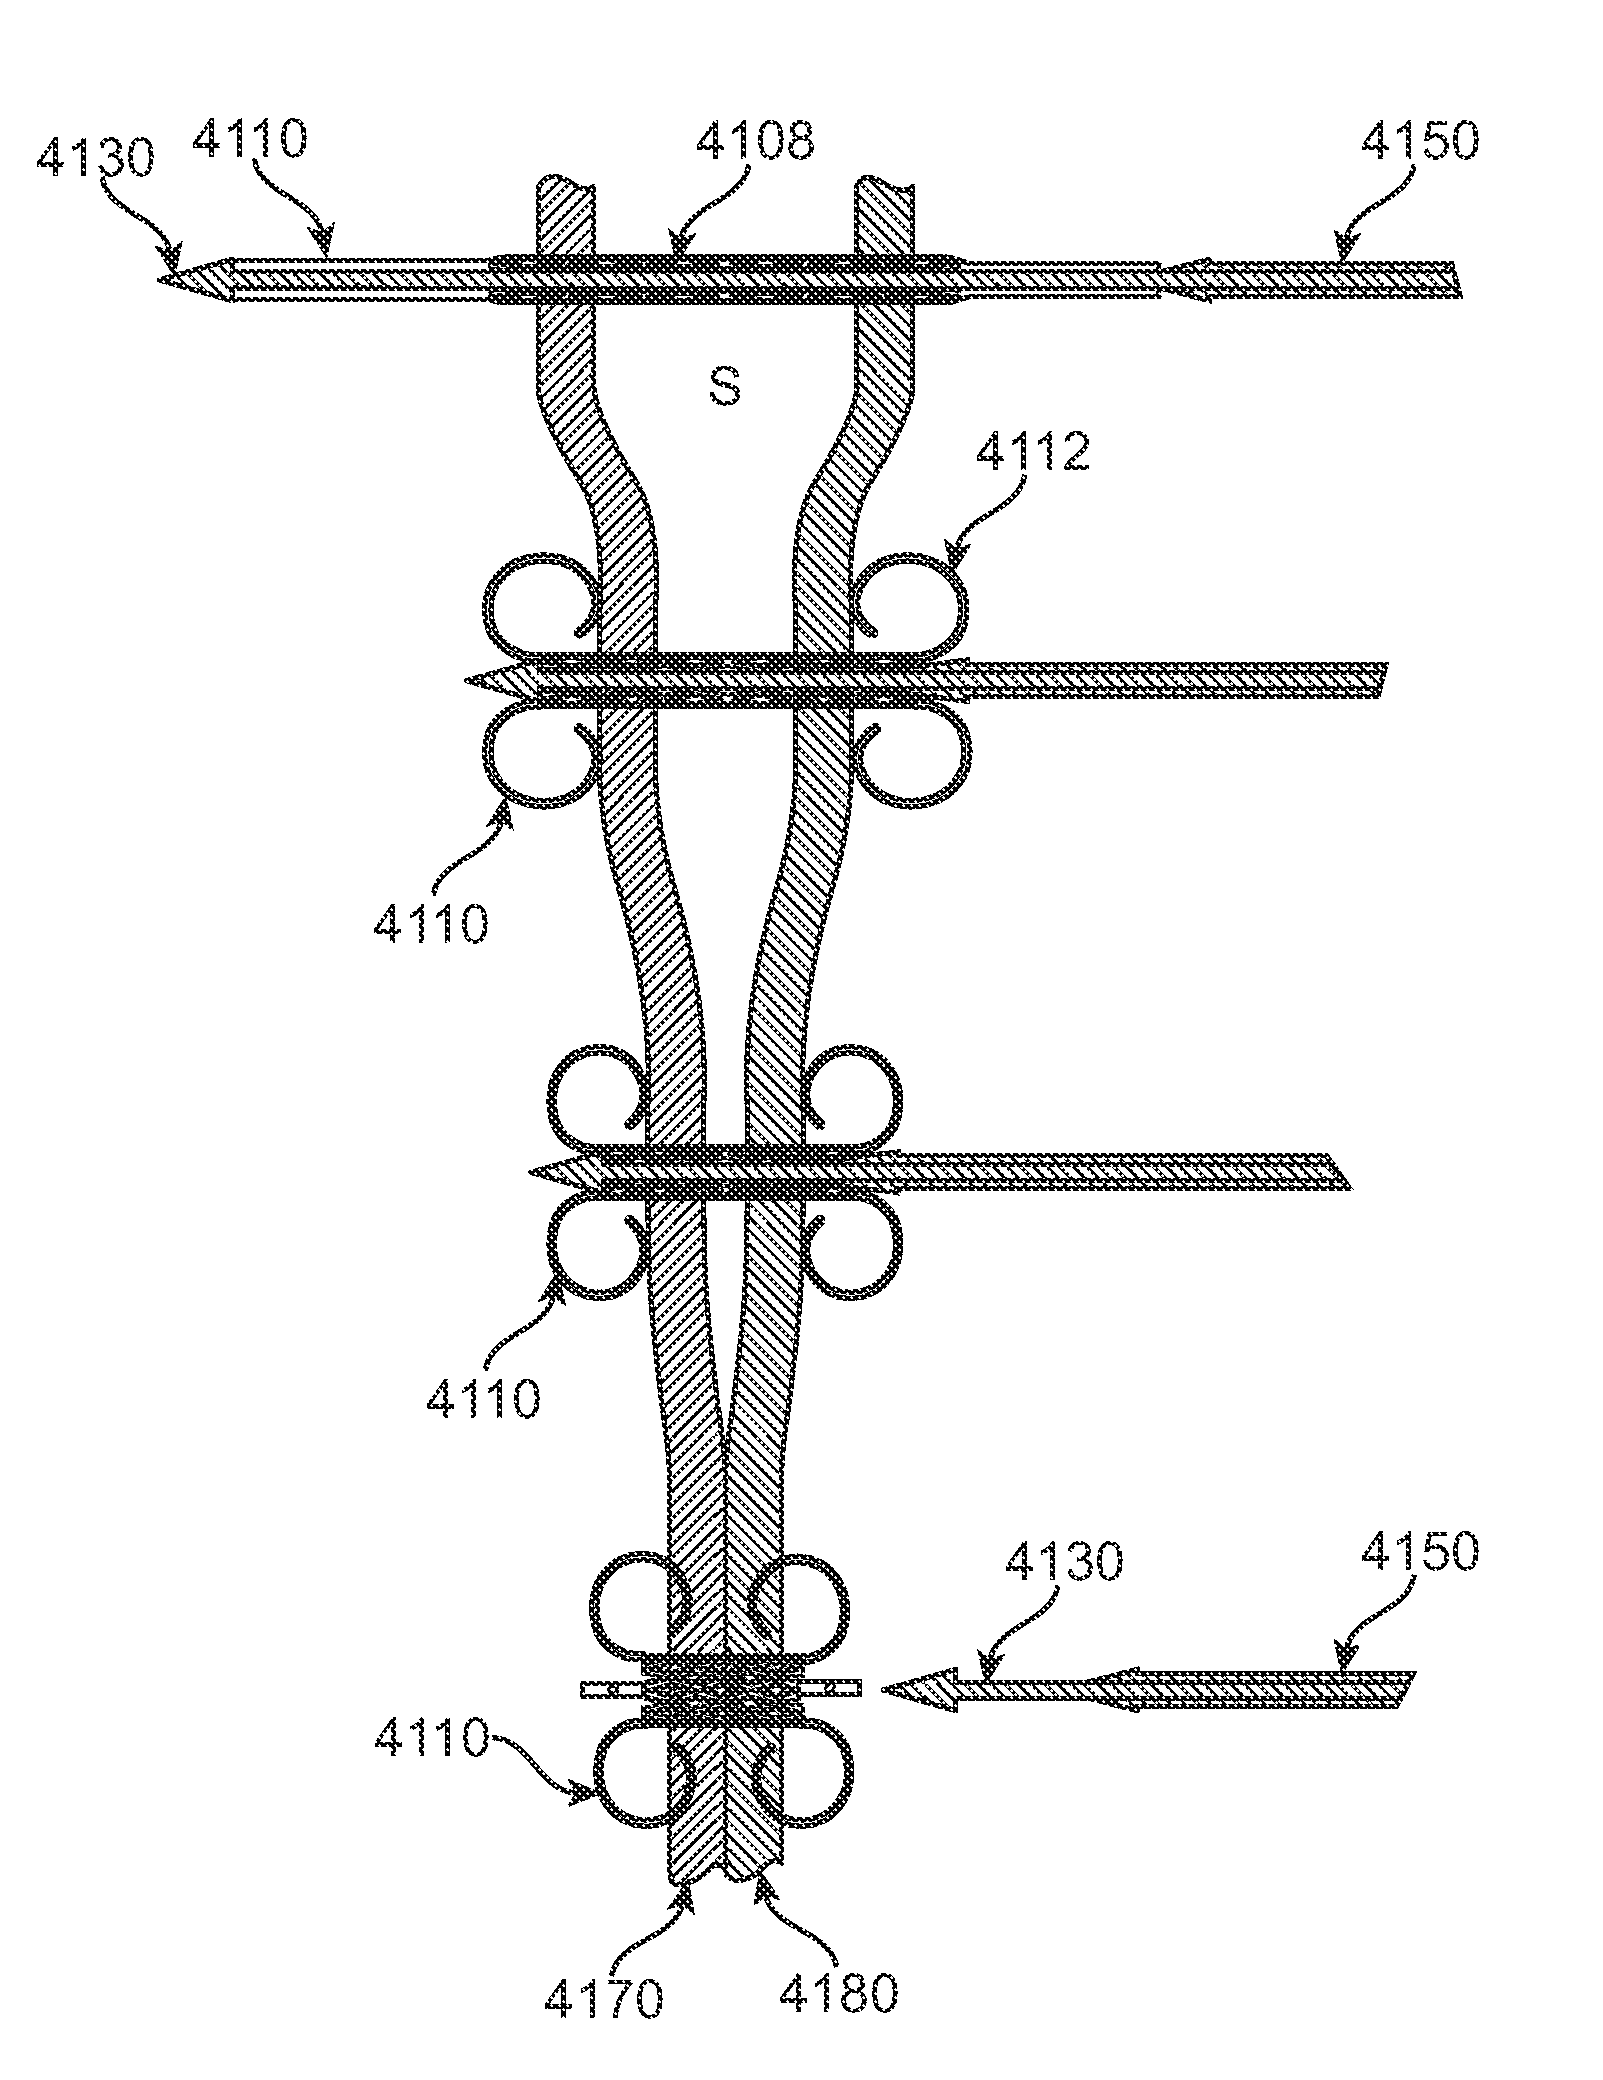 Luminal structure anchoring devices and methods